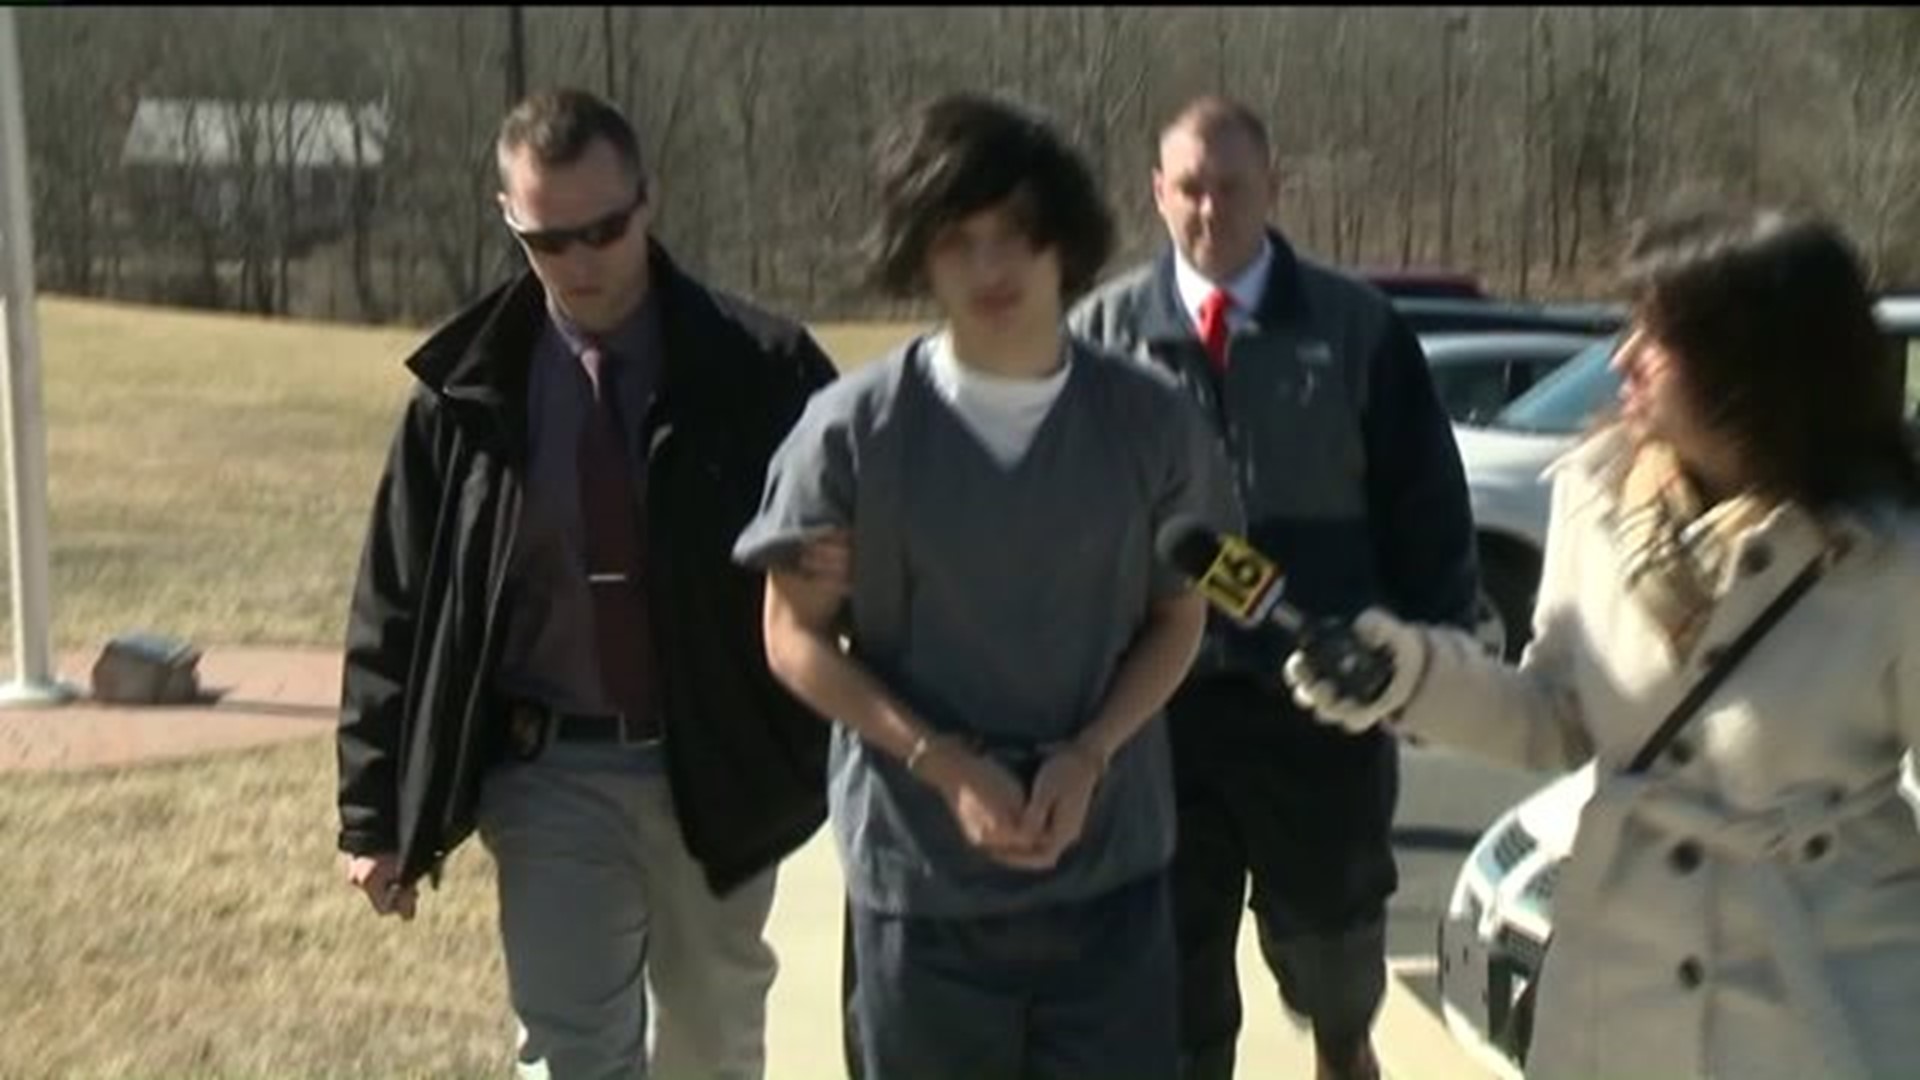 Accused Kidnapper Pleads Guilty